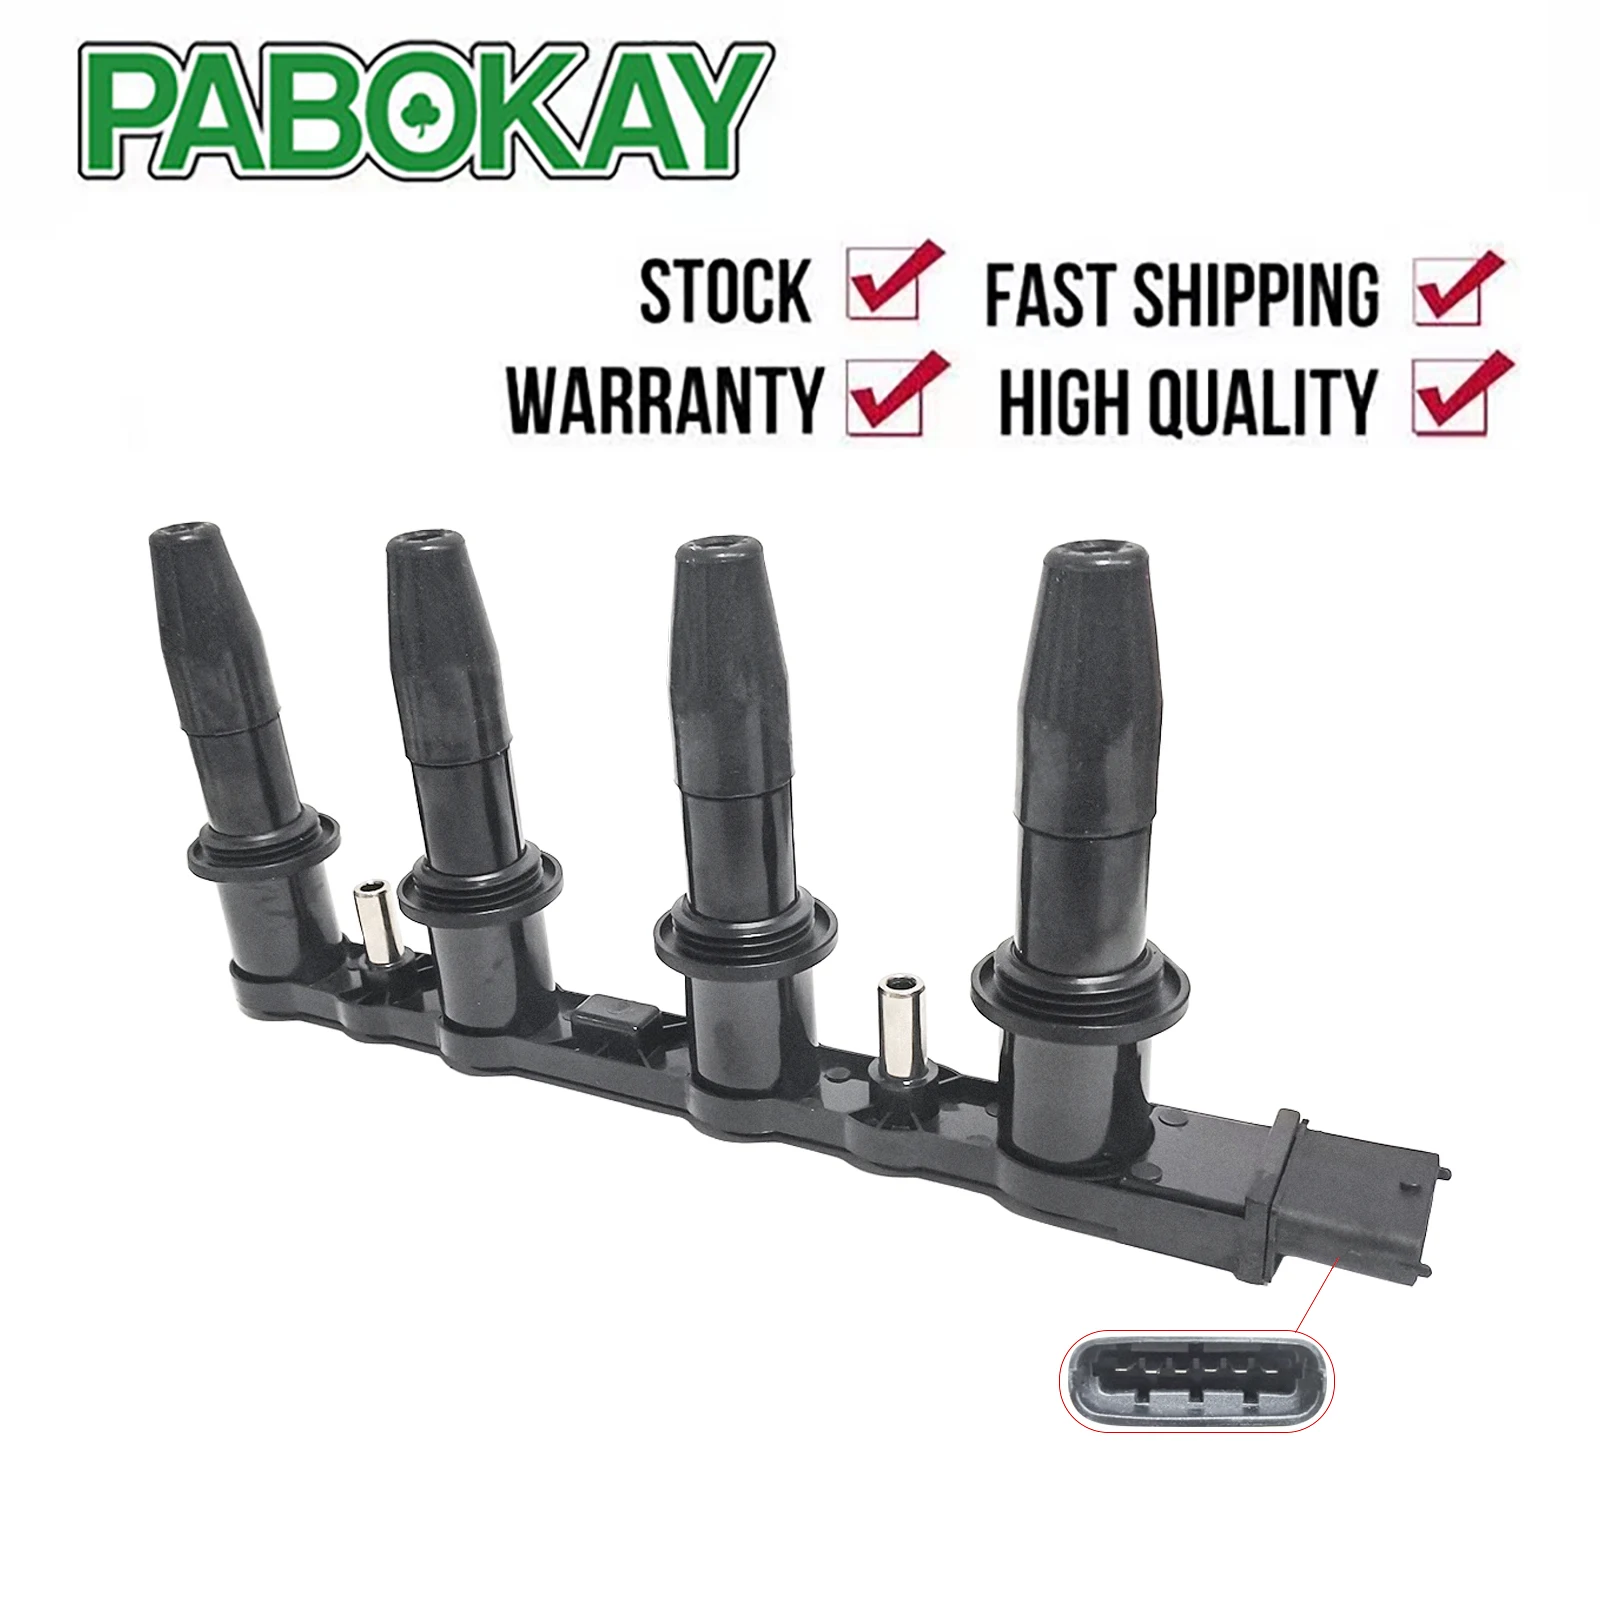 

IGNITION COIL PACK FOR VAUXHALL ZAFIRA B 1.6 ASTRA H CASSETTE TYPE 10458316 95517924 71739725 7173725 71744369 1104082 1208021